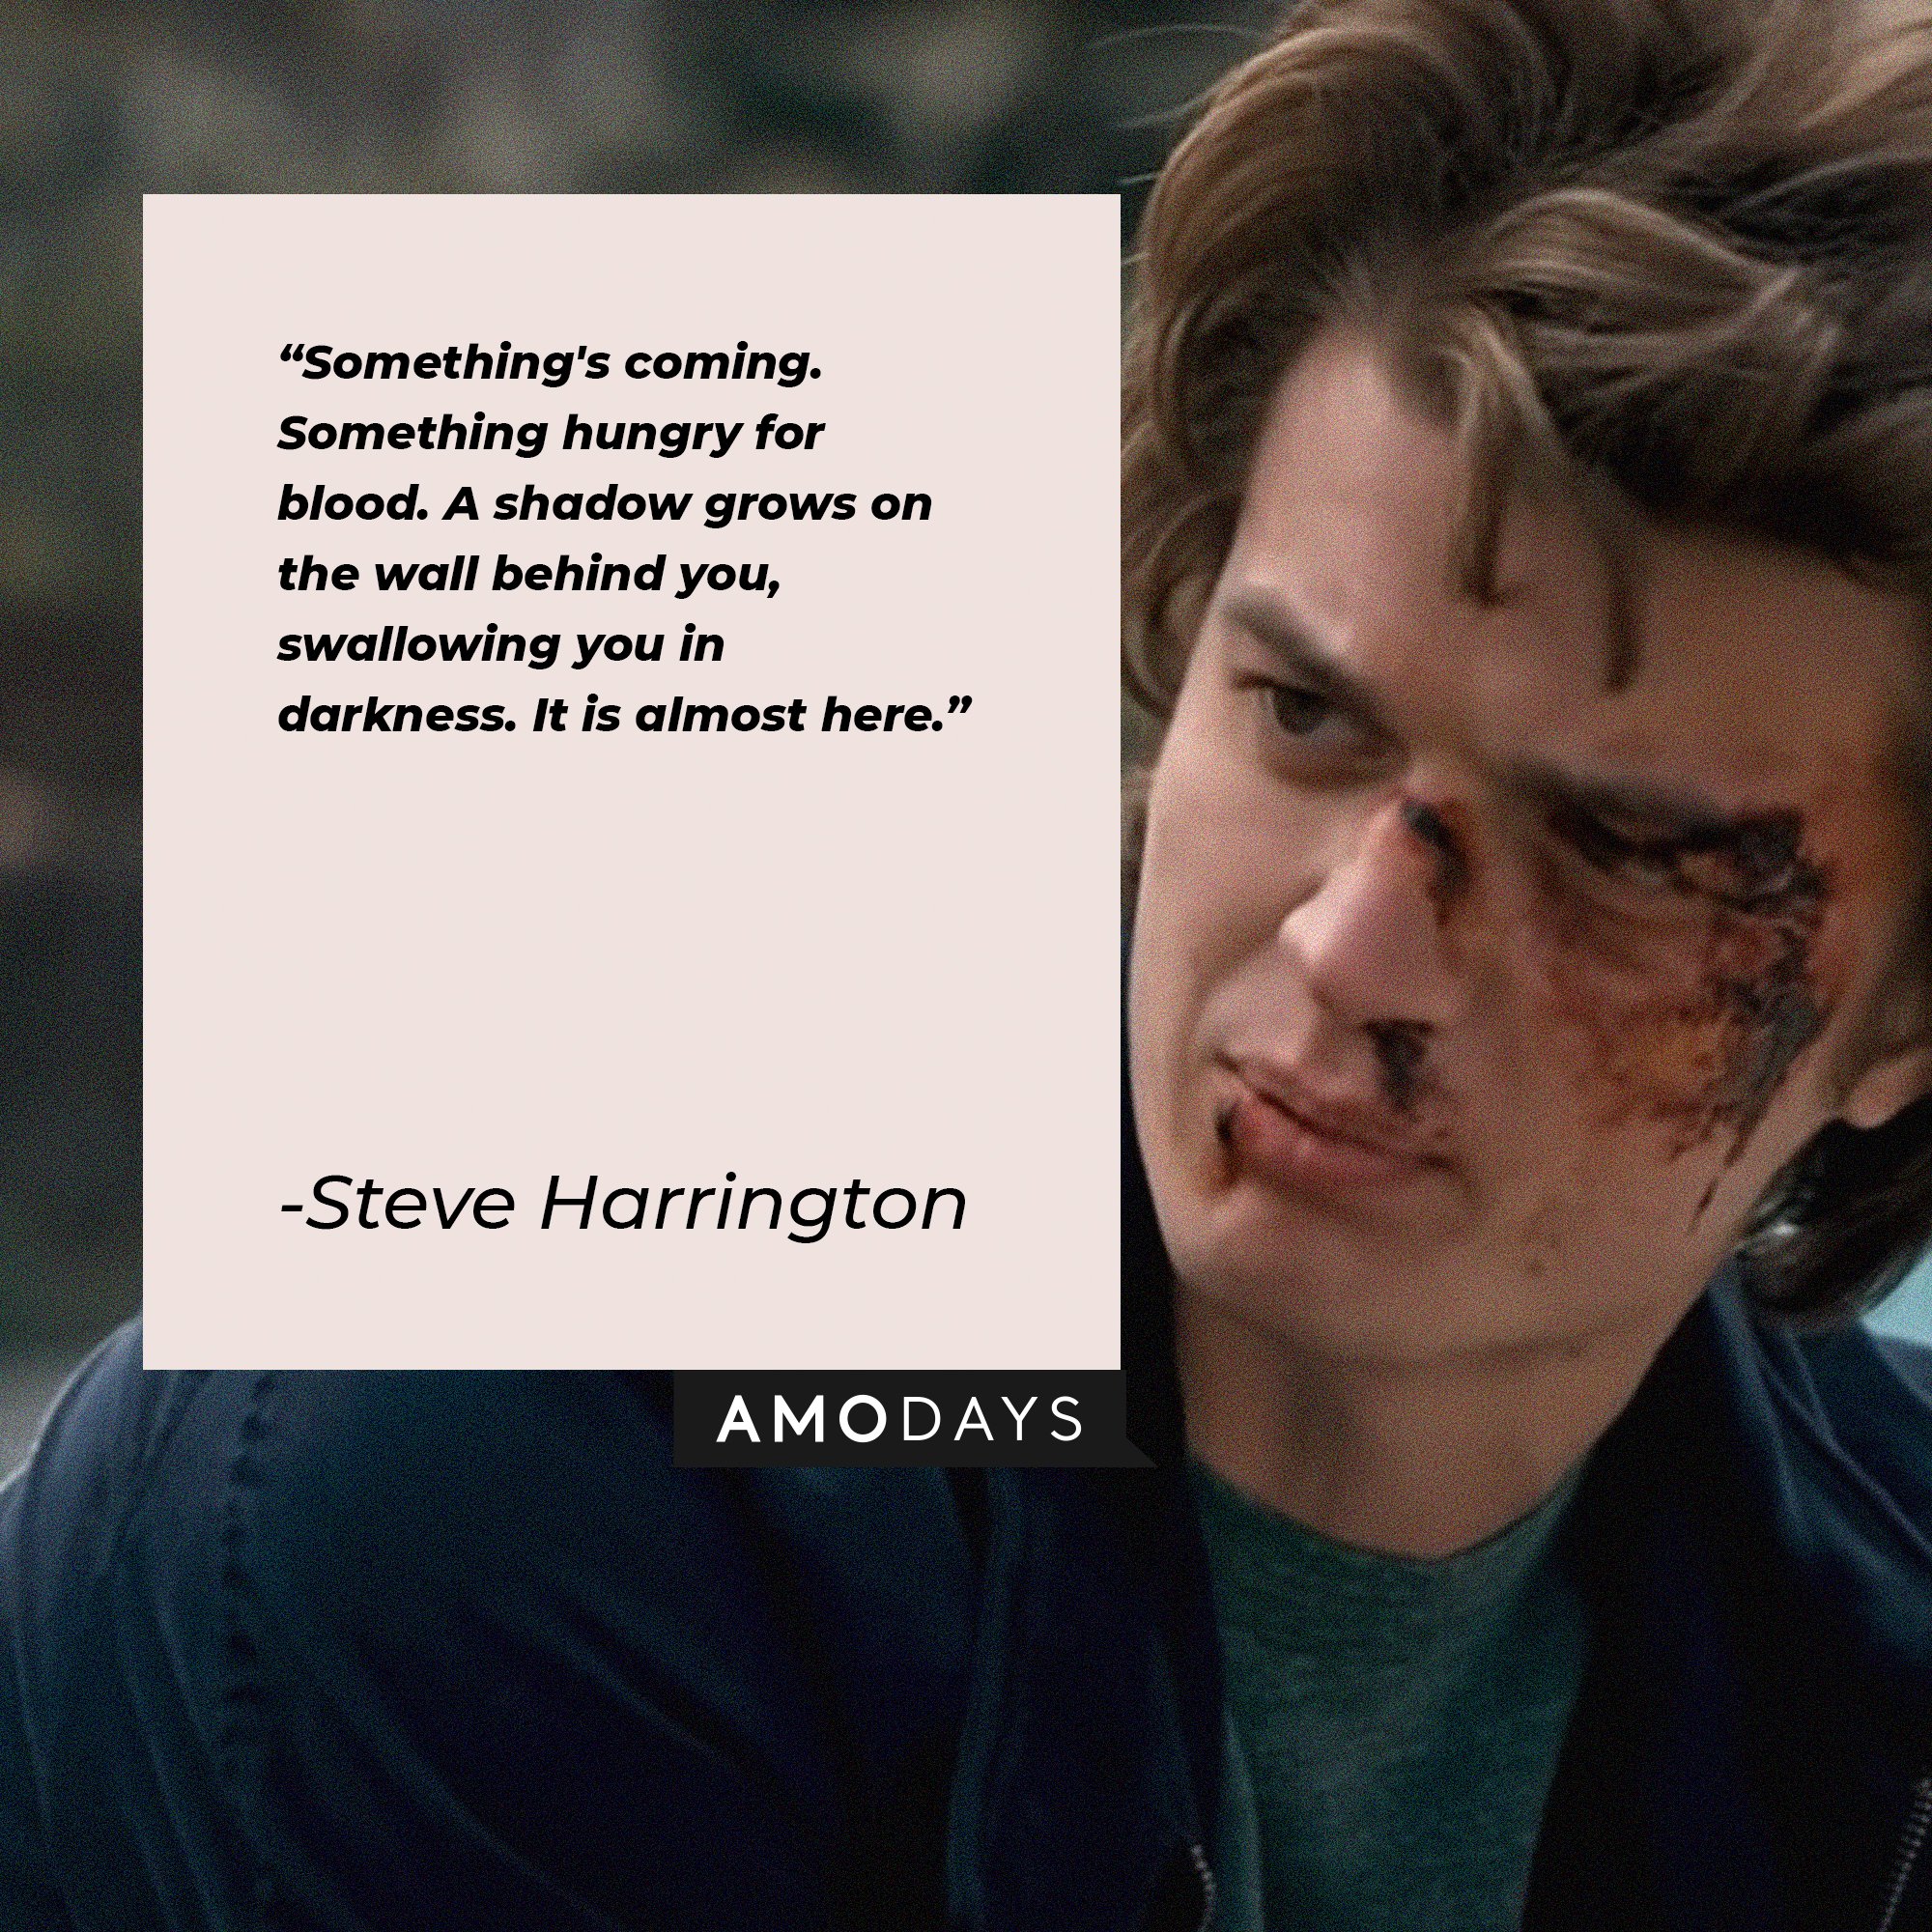  Steve Harrington's quote:  "Something's coming. Something hungry for blood. A shadow grows on the wall behind you, swallowing you in darkness. It is almost here." | Image: AmoDays  